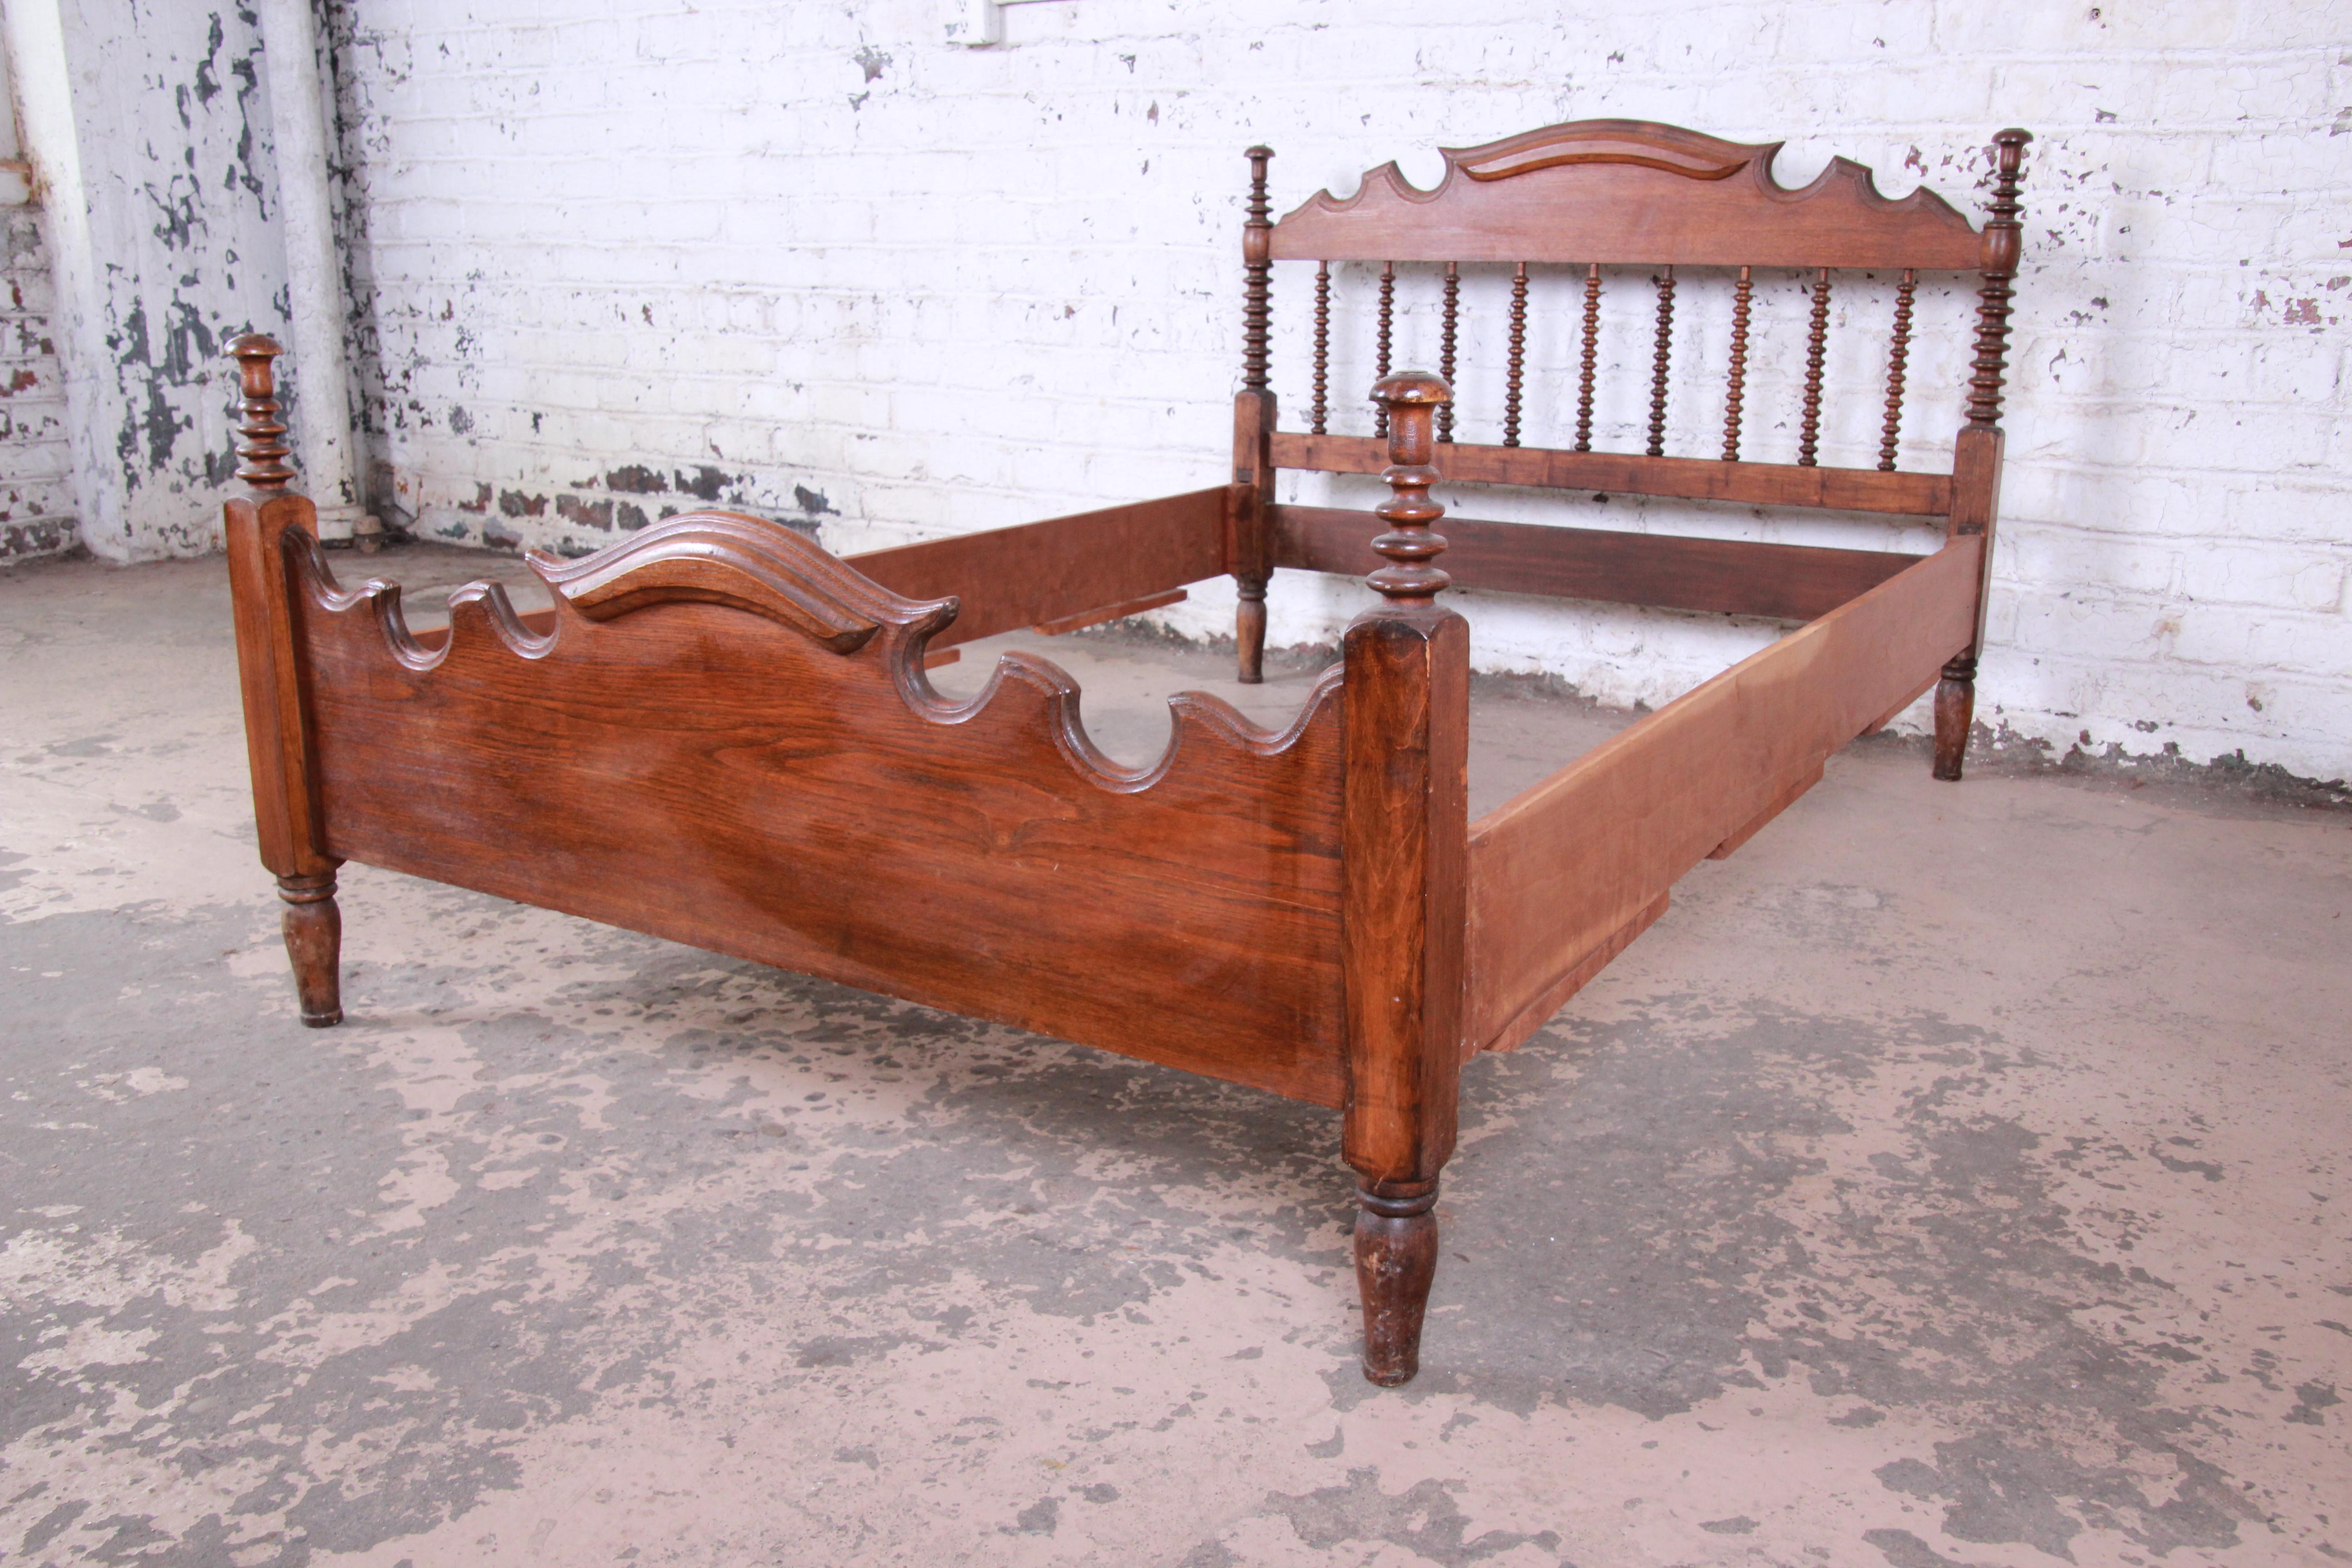 A beautiful carved walnut Jenny Lind spindle bed. The bed has gorgeous walnut wood grain and nice carved wood details. Assembled it measures 52